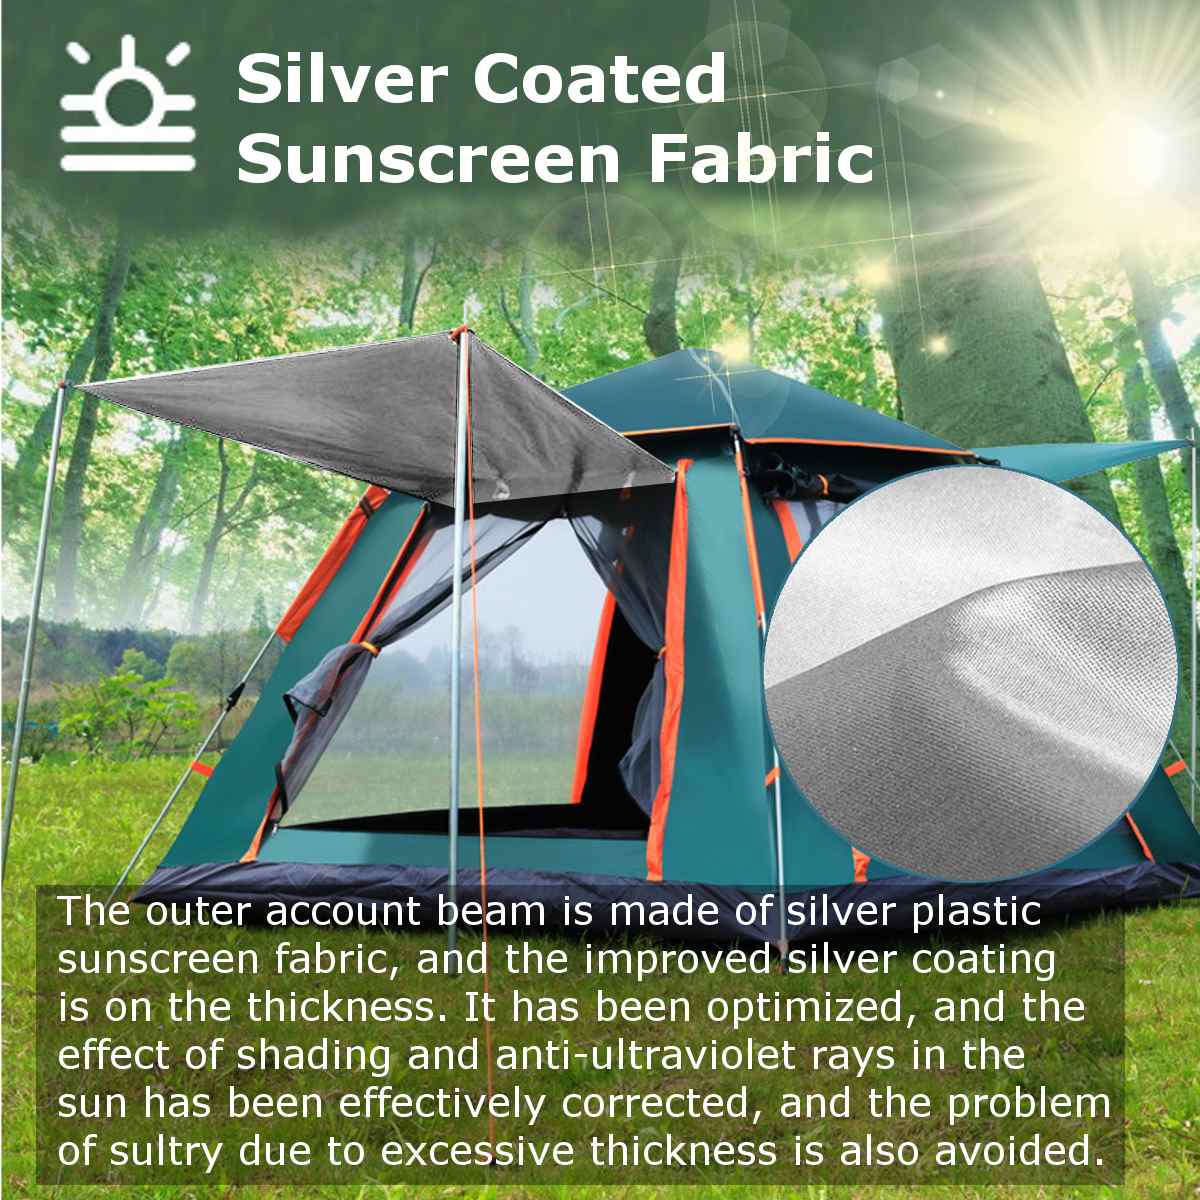 Cheap Goat Tents 5 6 Person Automatic Speed open Beach Tent Double Deck Tent Camping Tent With Mesh Portable Backpack Tent Suitable For Hiking   